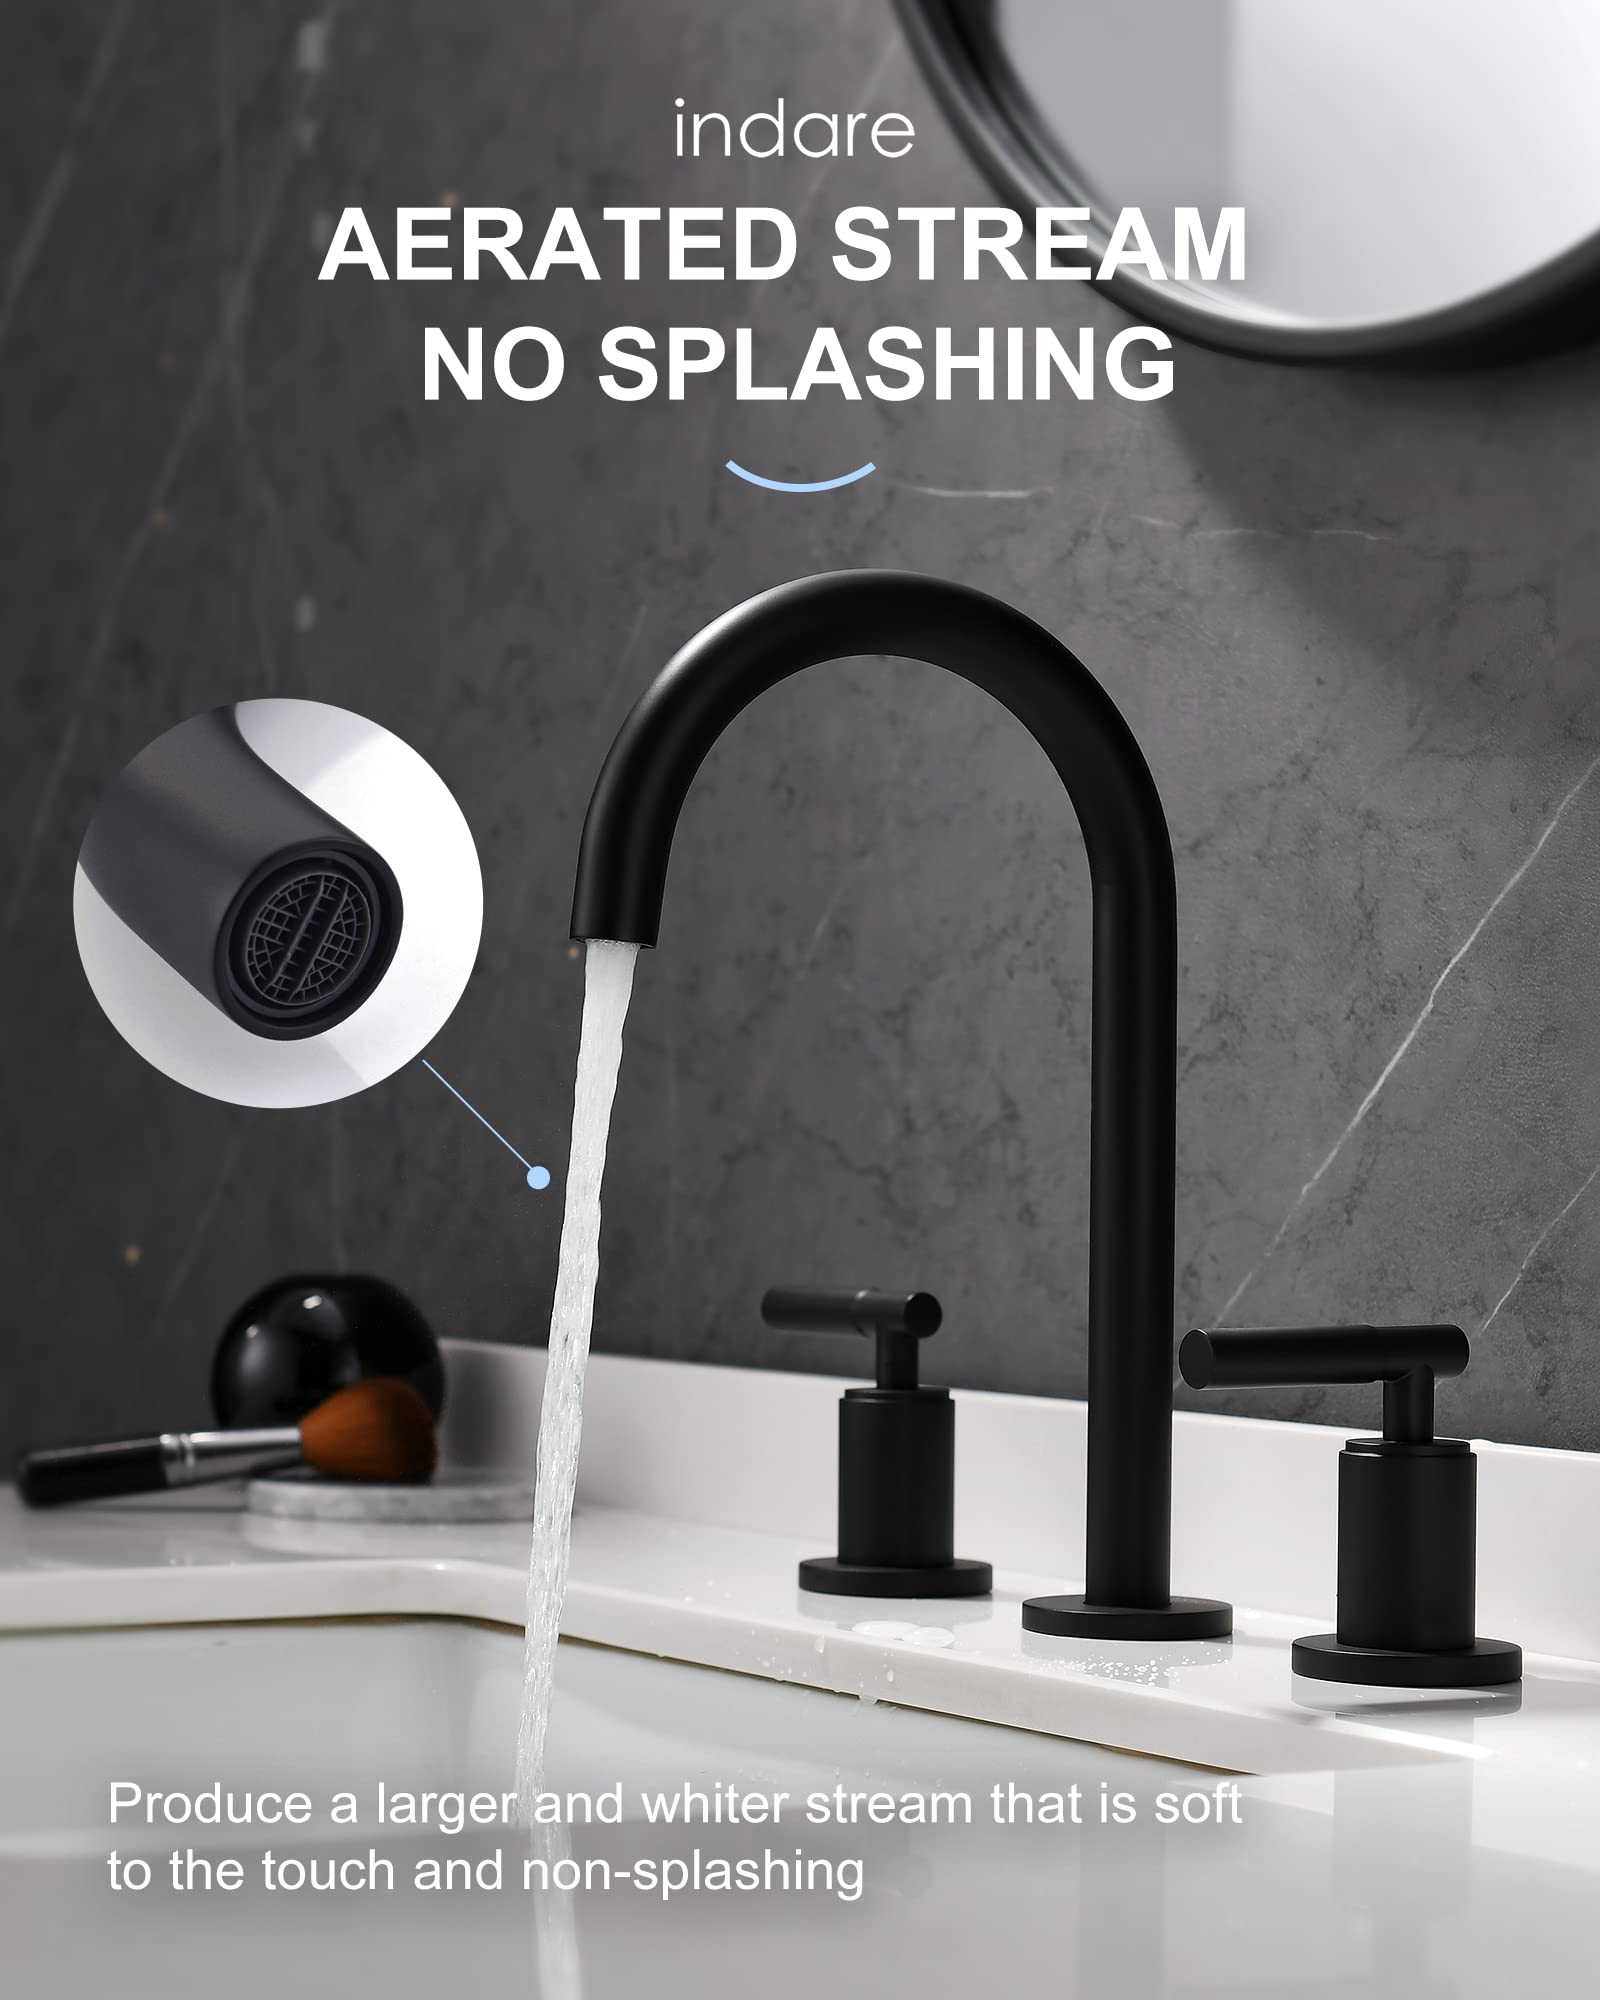 Matte Black Bathroom Faucet, Indare 360° Swivel Spout Two Handles Widespread 4 Inch 8Inch Brass Bathroom Sink Faucet 3 Hole with Pop-Up Drain and Water Supply Lines, Upgraded Style